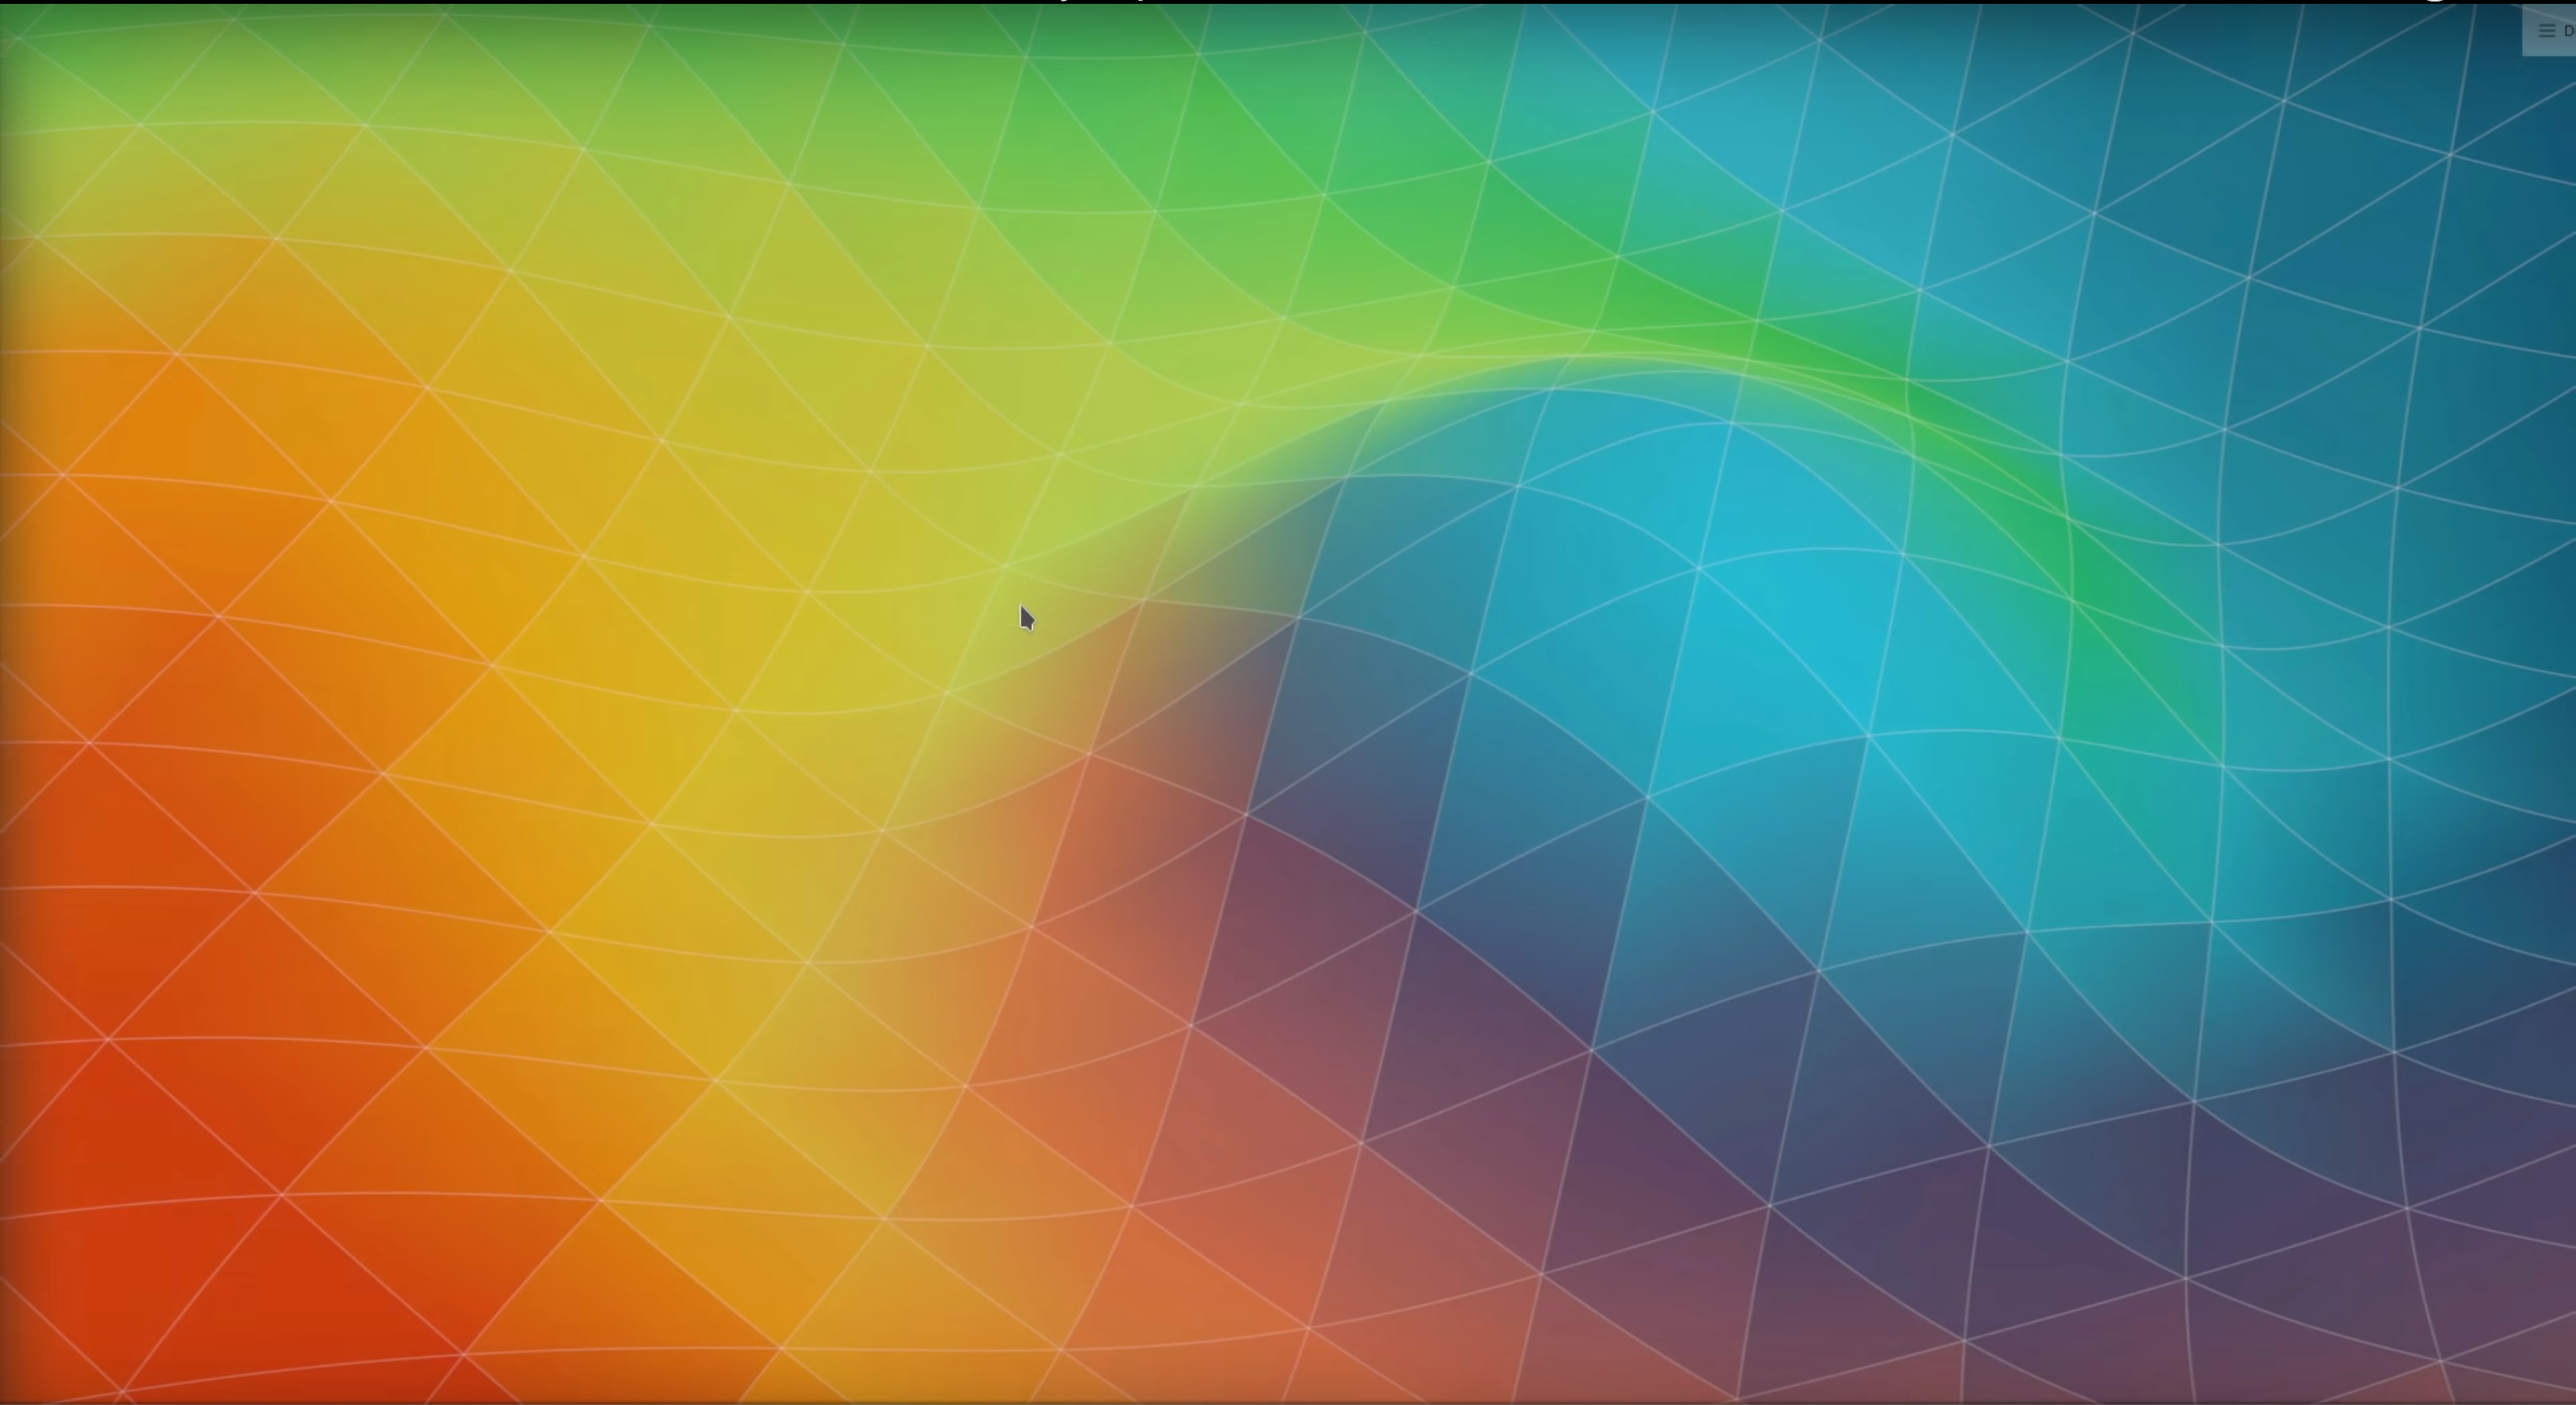 Where can I find this default KDE Neon Wallpaper?